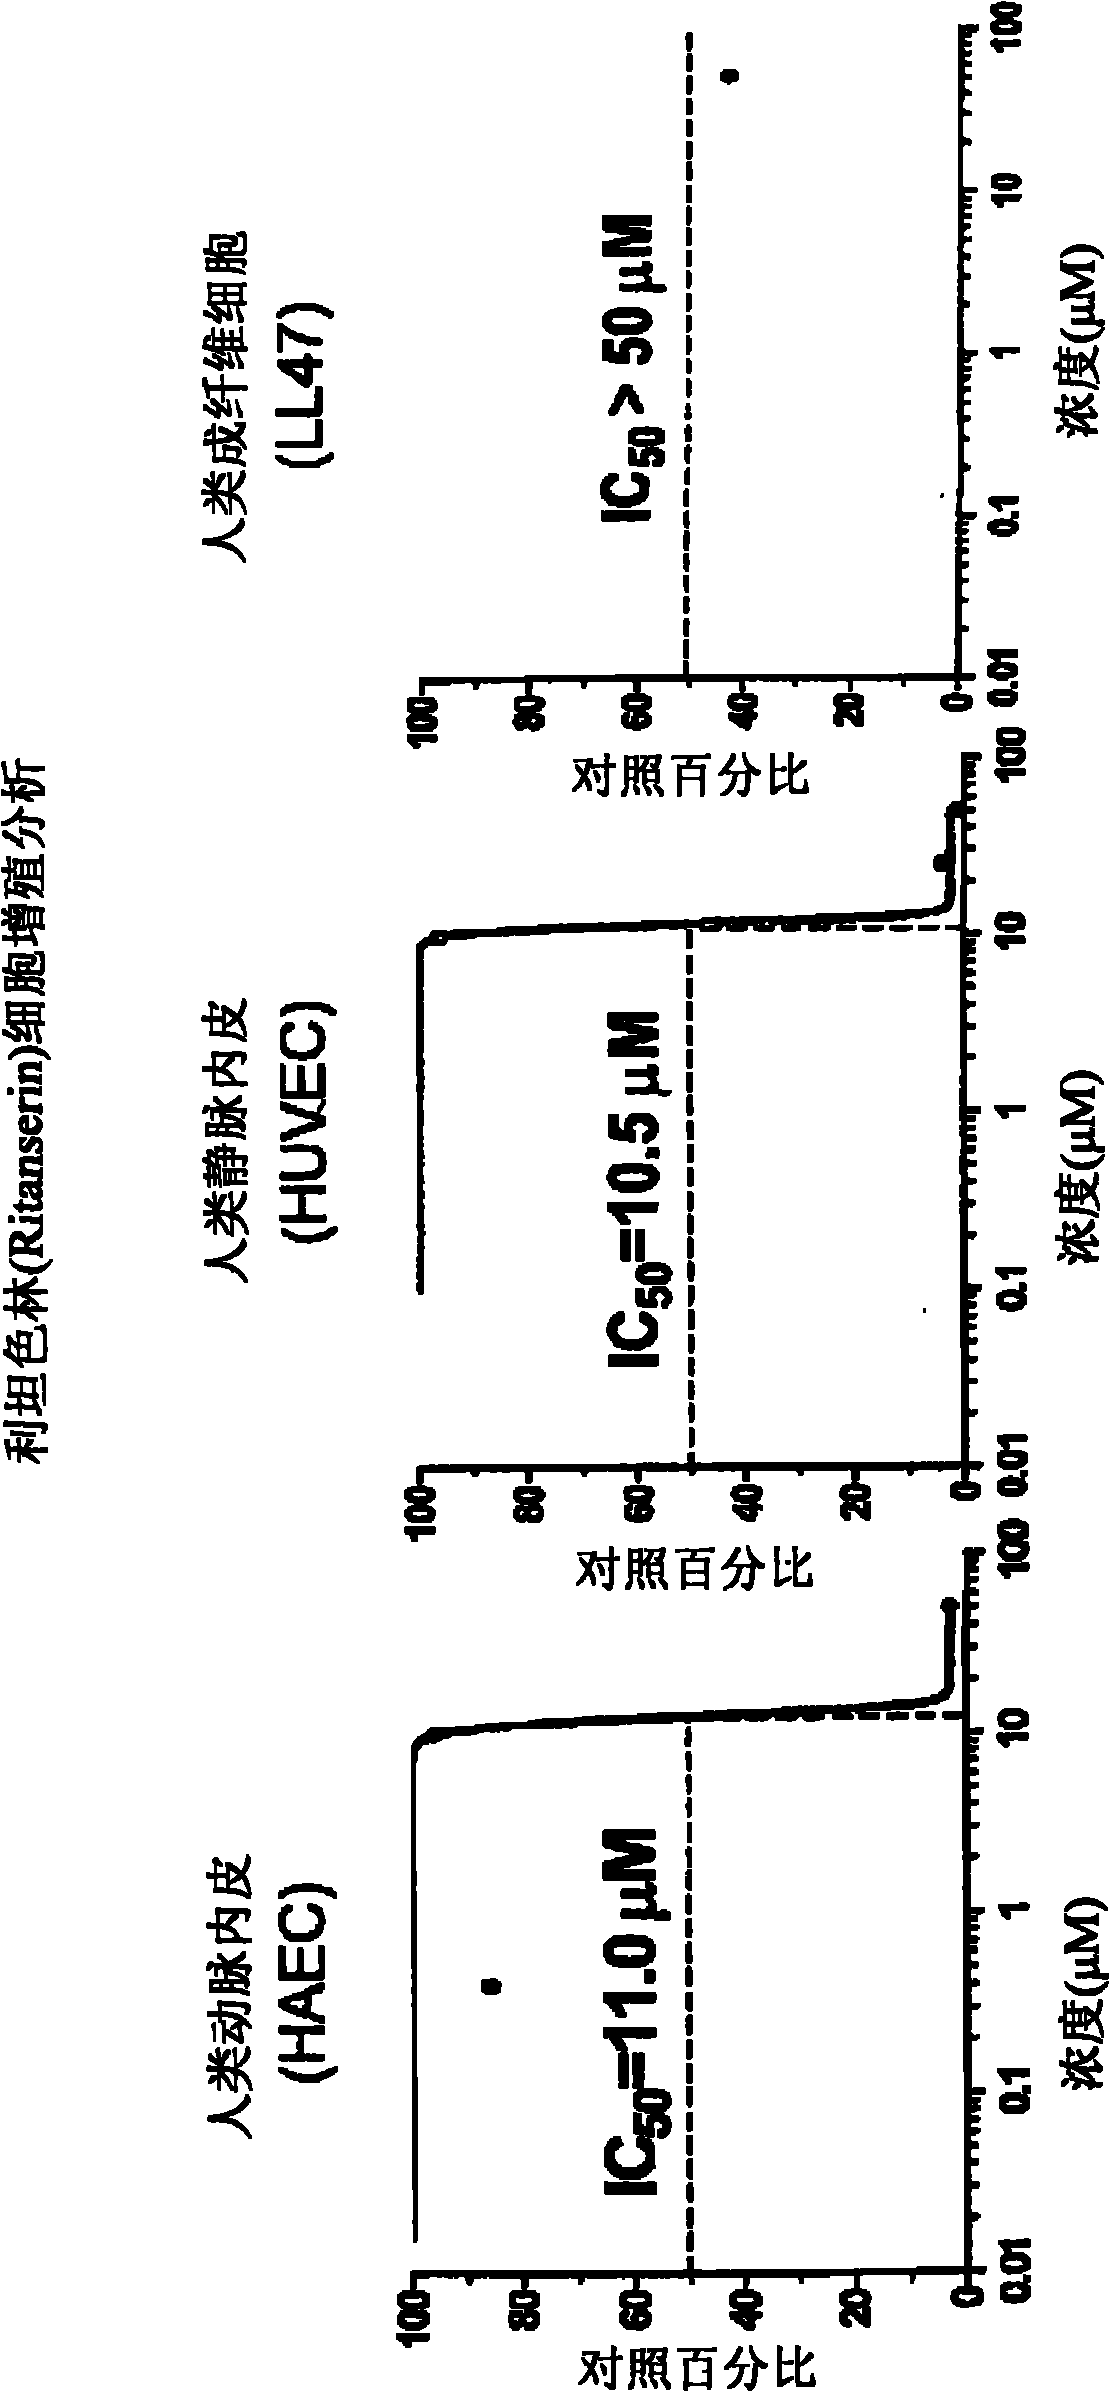 Anti-angiogenic agents and methods of use